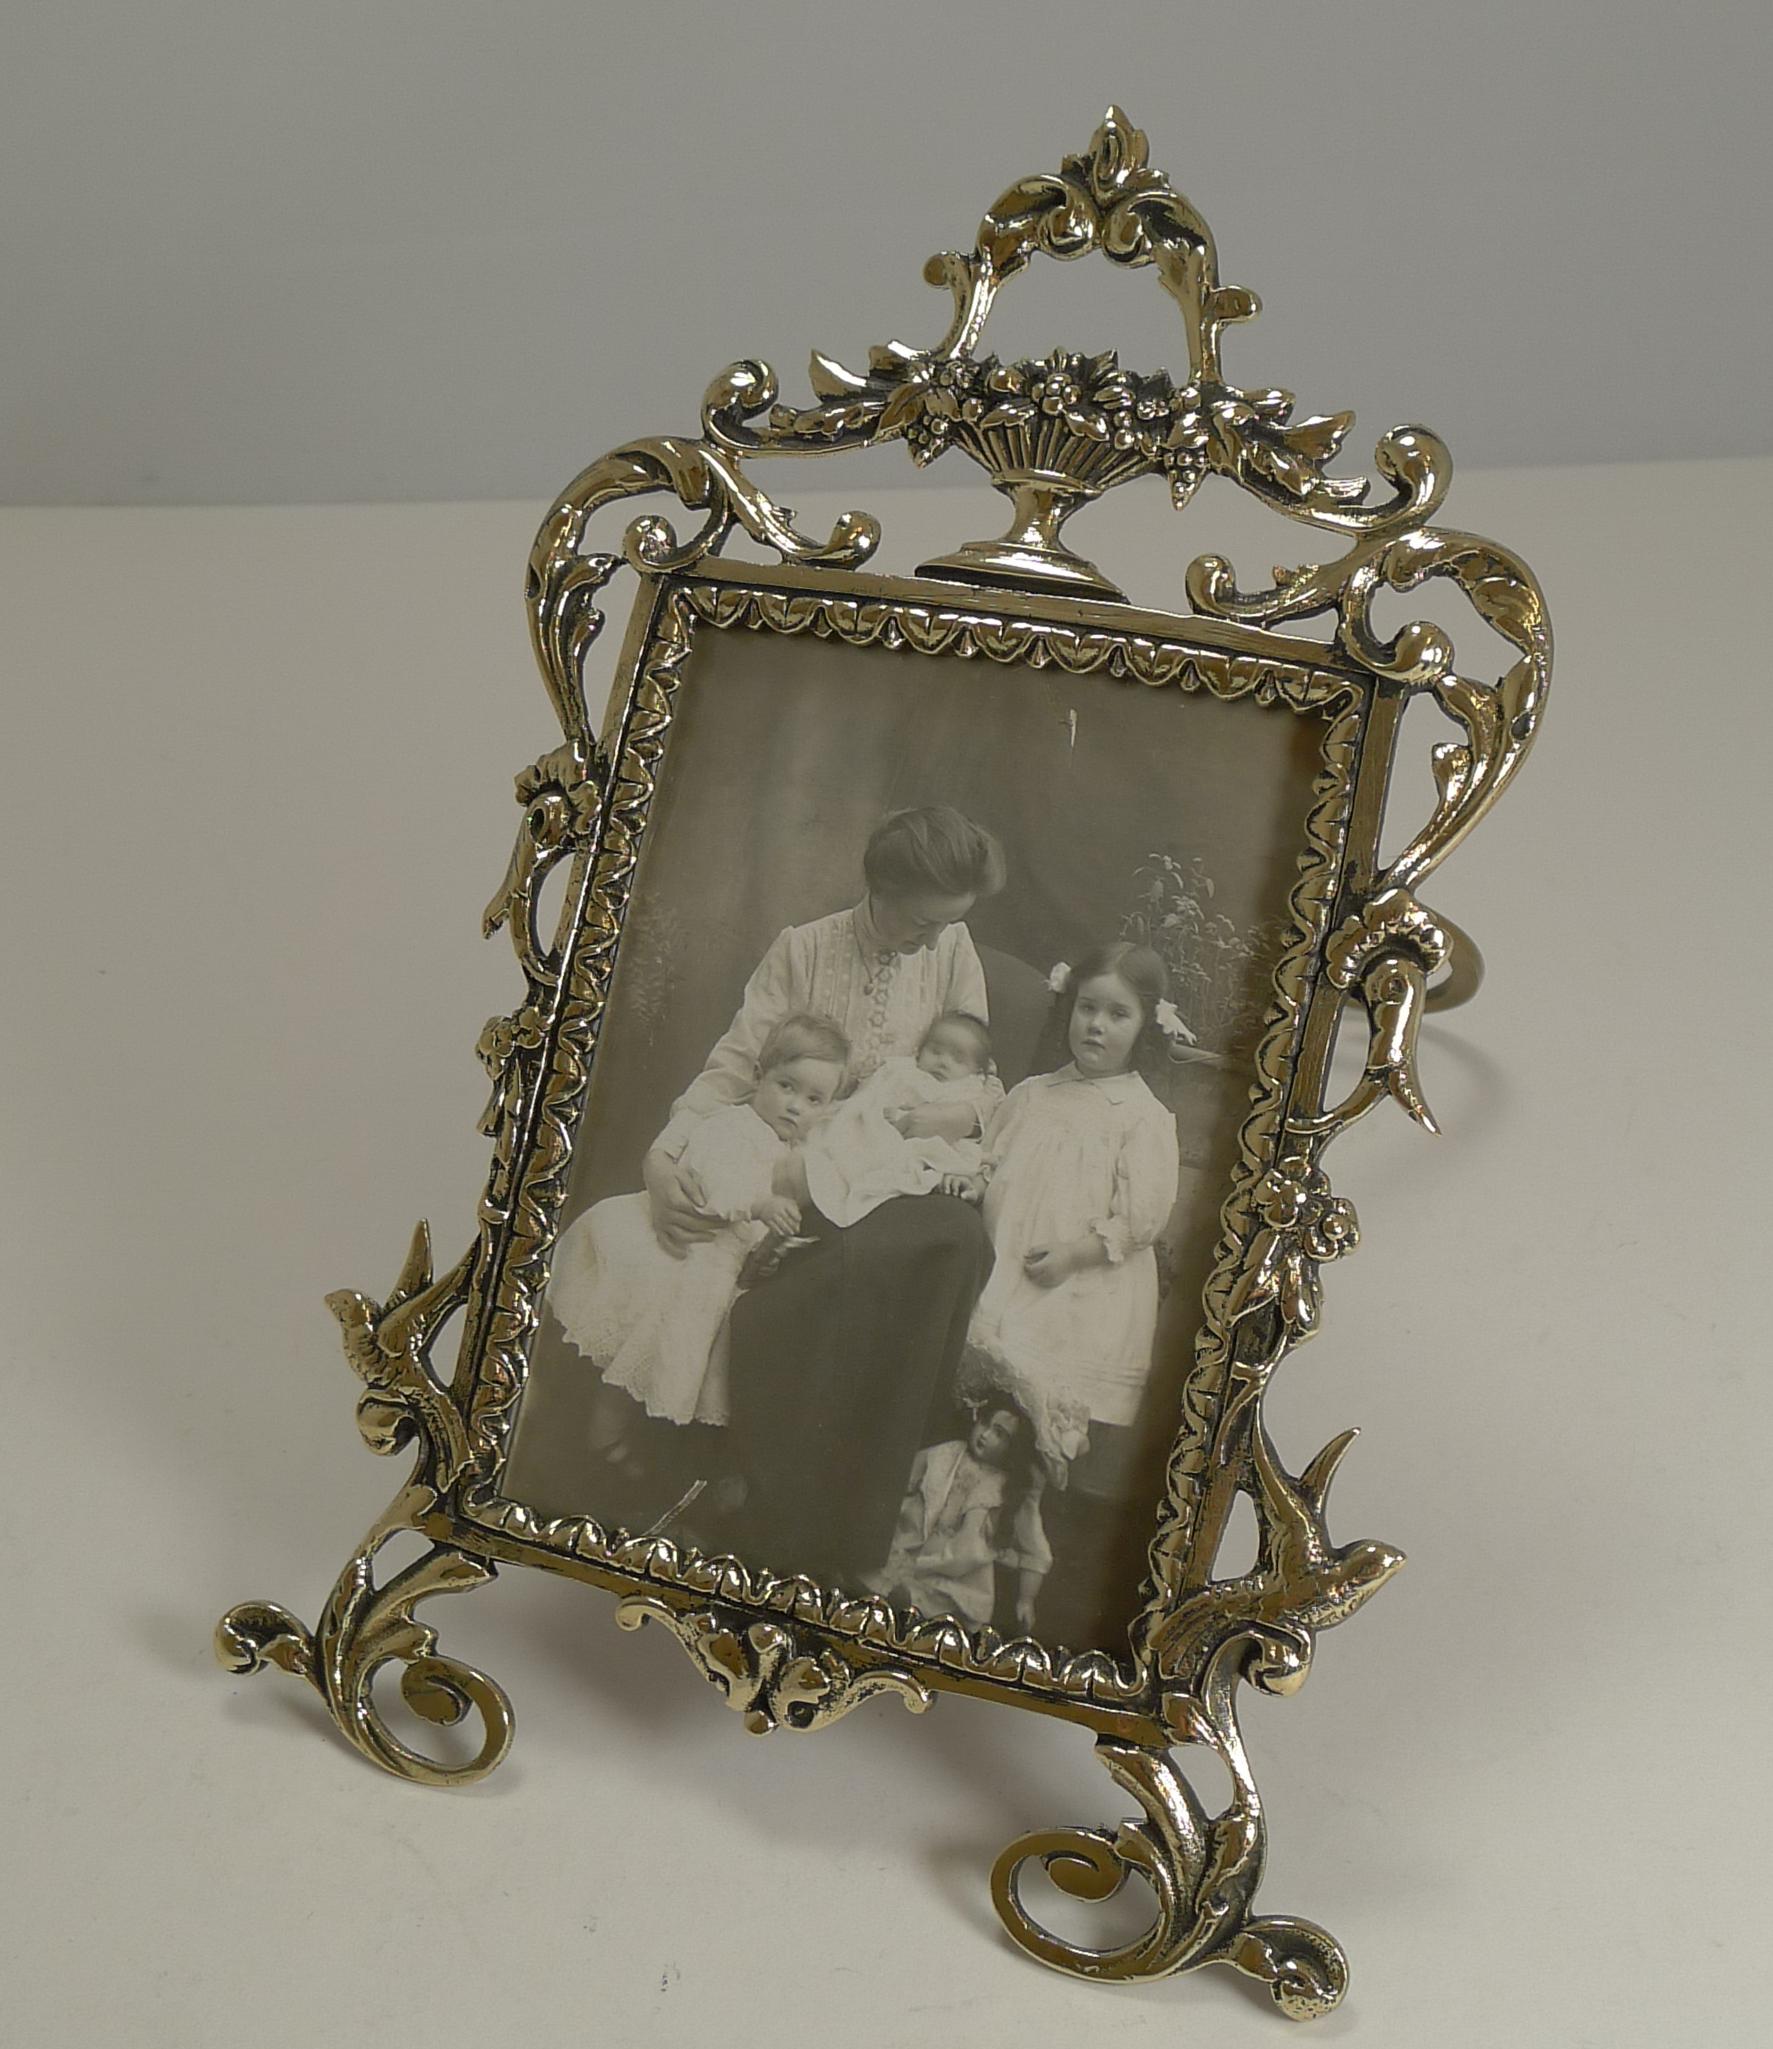 Pretty as a picture, this stunning cast brass photograph frame has been professionally polished to gleam.

Standing on two scroll feet, there is a Swallow on either side just above each foot; the top has a wonderful classical urn overflowing with